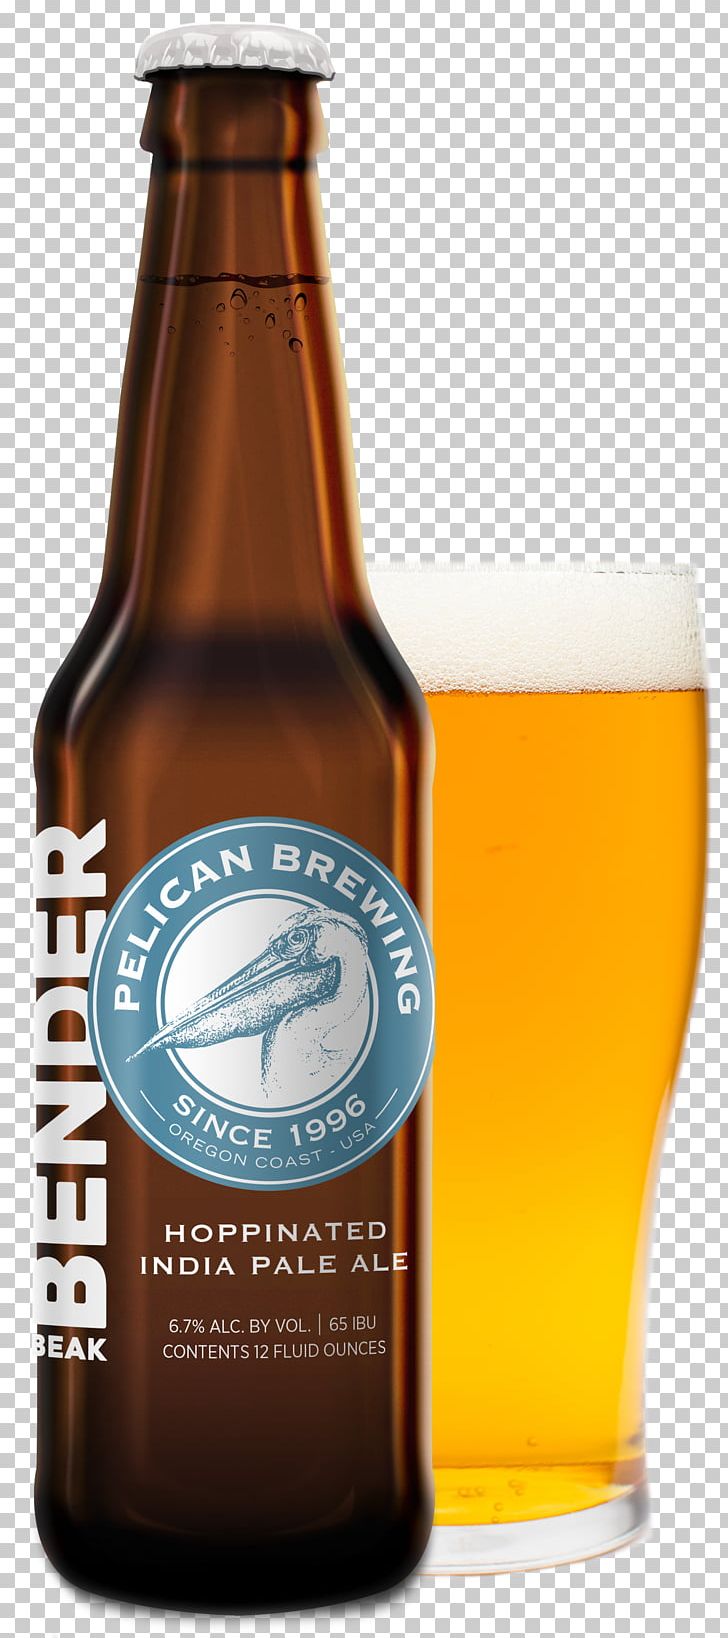 Pelican Brewing India Pale Ale Beer Founders Brewing Company PNG, Clipart, Alcohol By Volume, Ale, Beak, Beer Bottle, Beer Brewing Grains Malts Free PNG Download